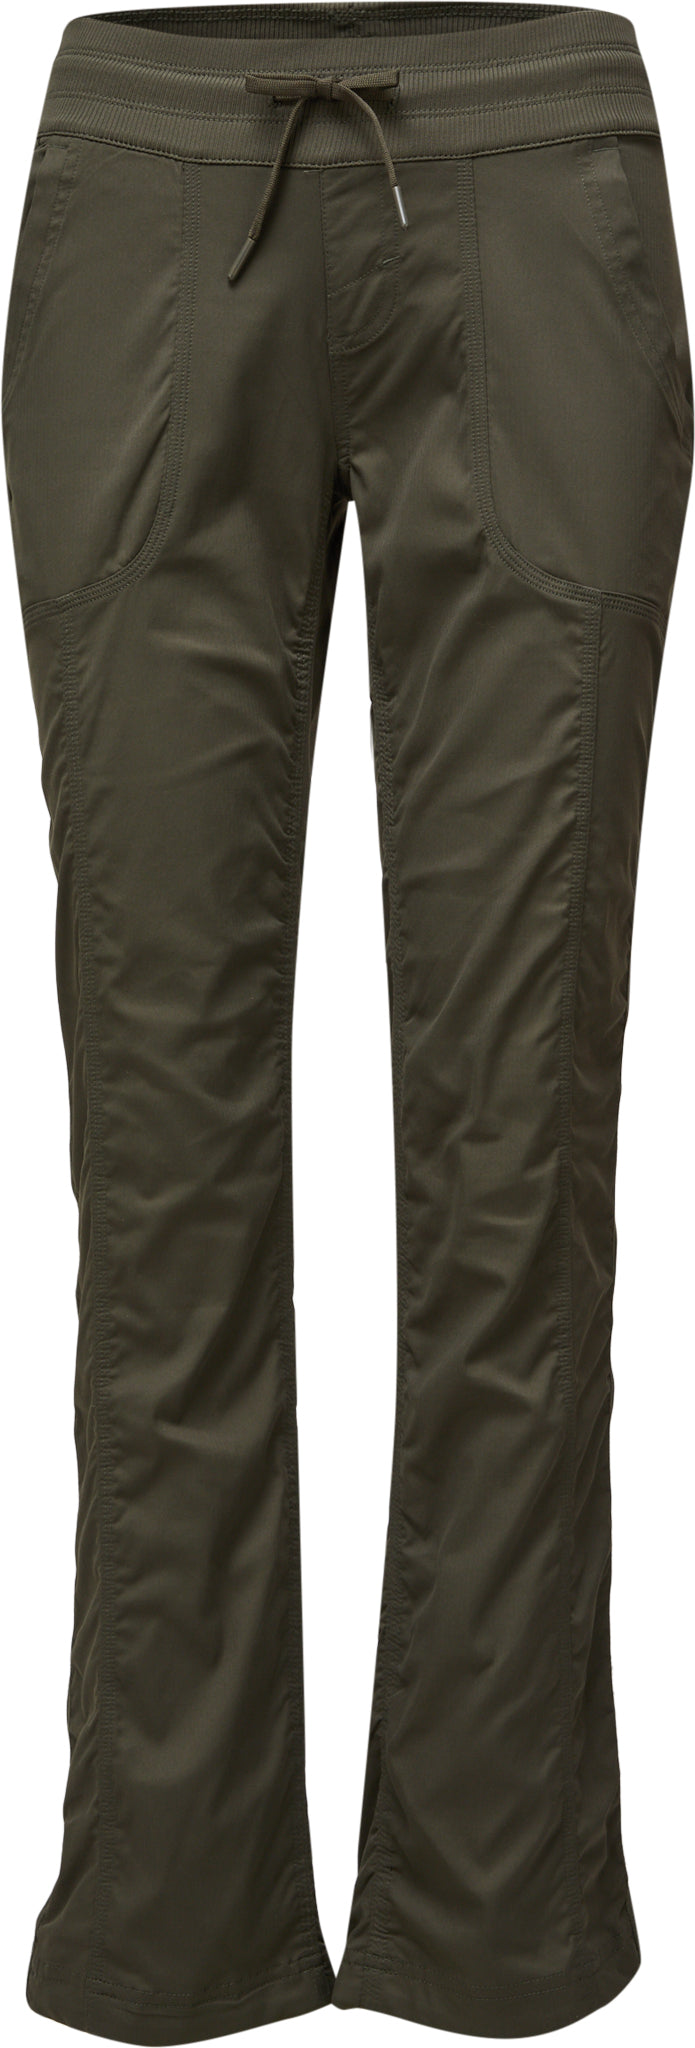 Men's Trekking and Hiking Pants and Trousers l Green & Grey – Tripole Gears